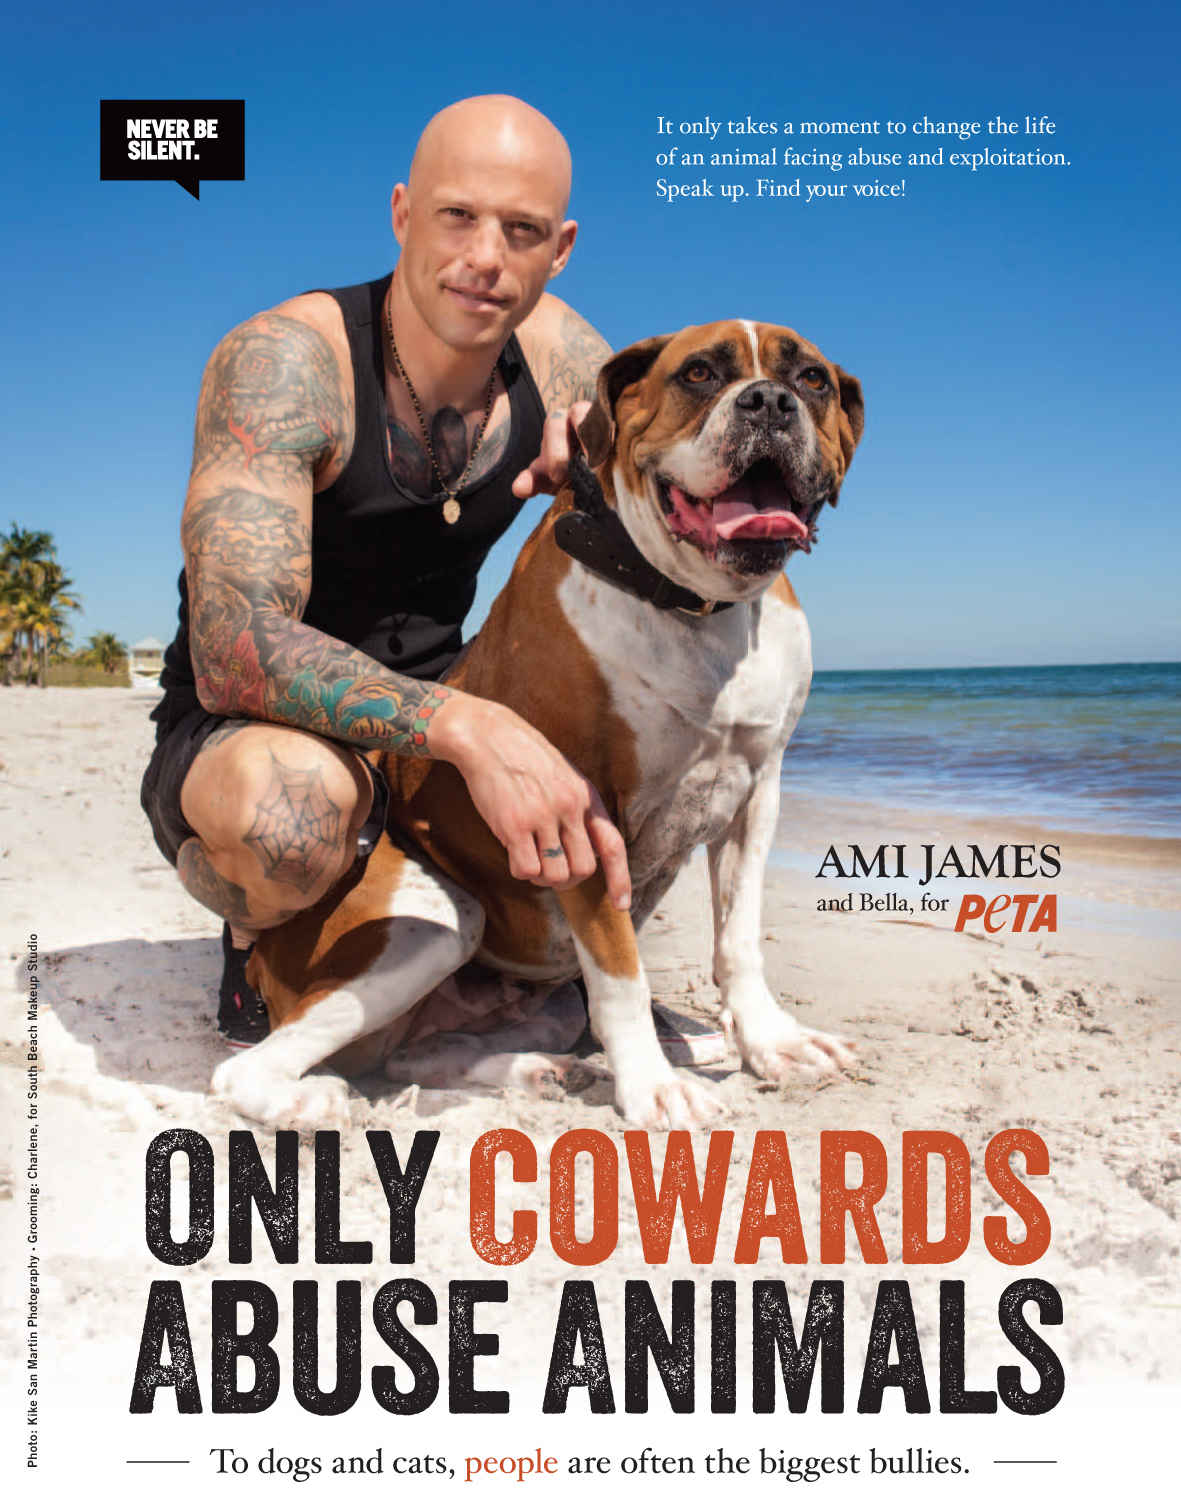 Ami James: 'Only Cowards Abuse Animals' | PETA